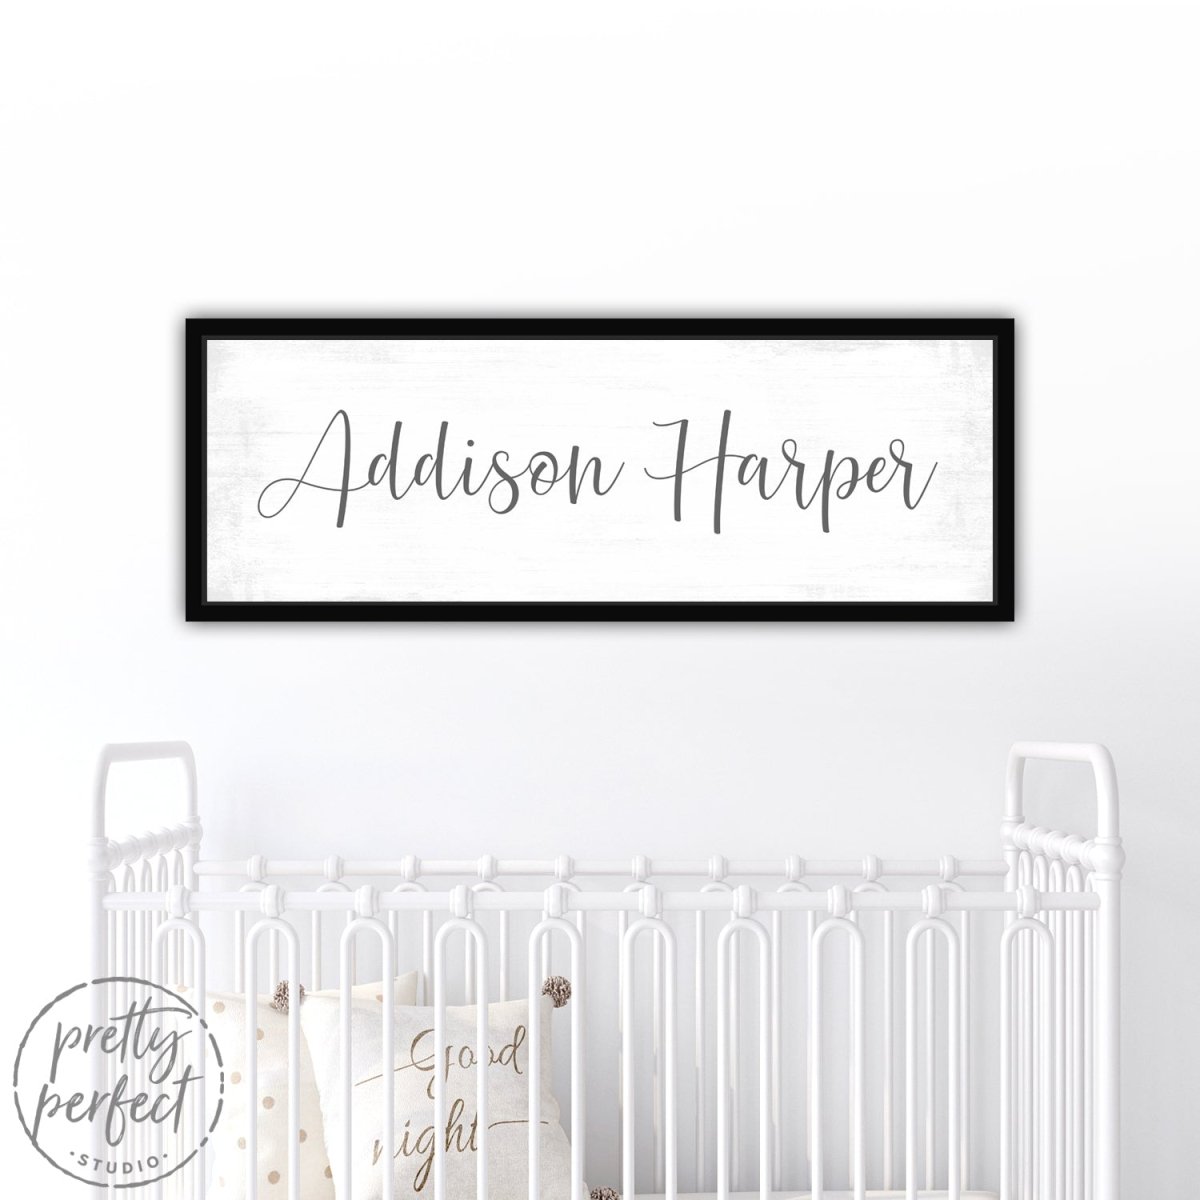 Baby Nursery Wall Art Canvas, Girls Picture Baby Room